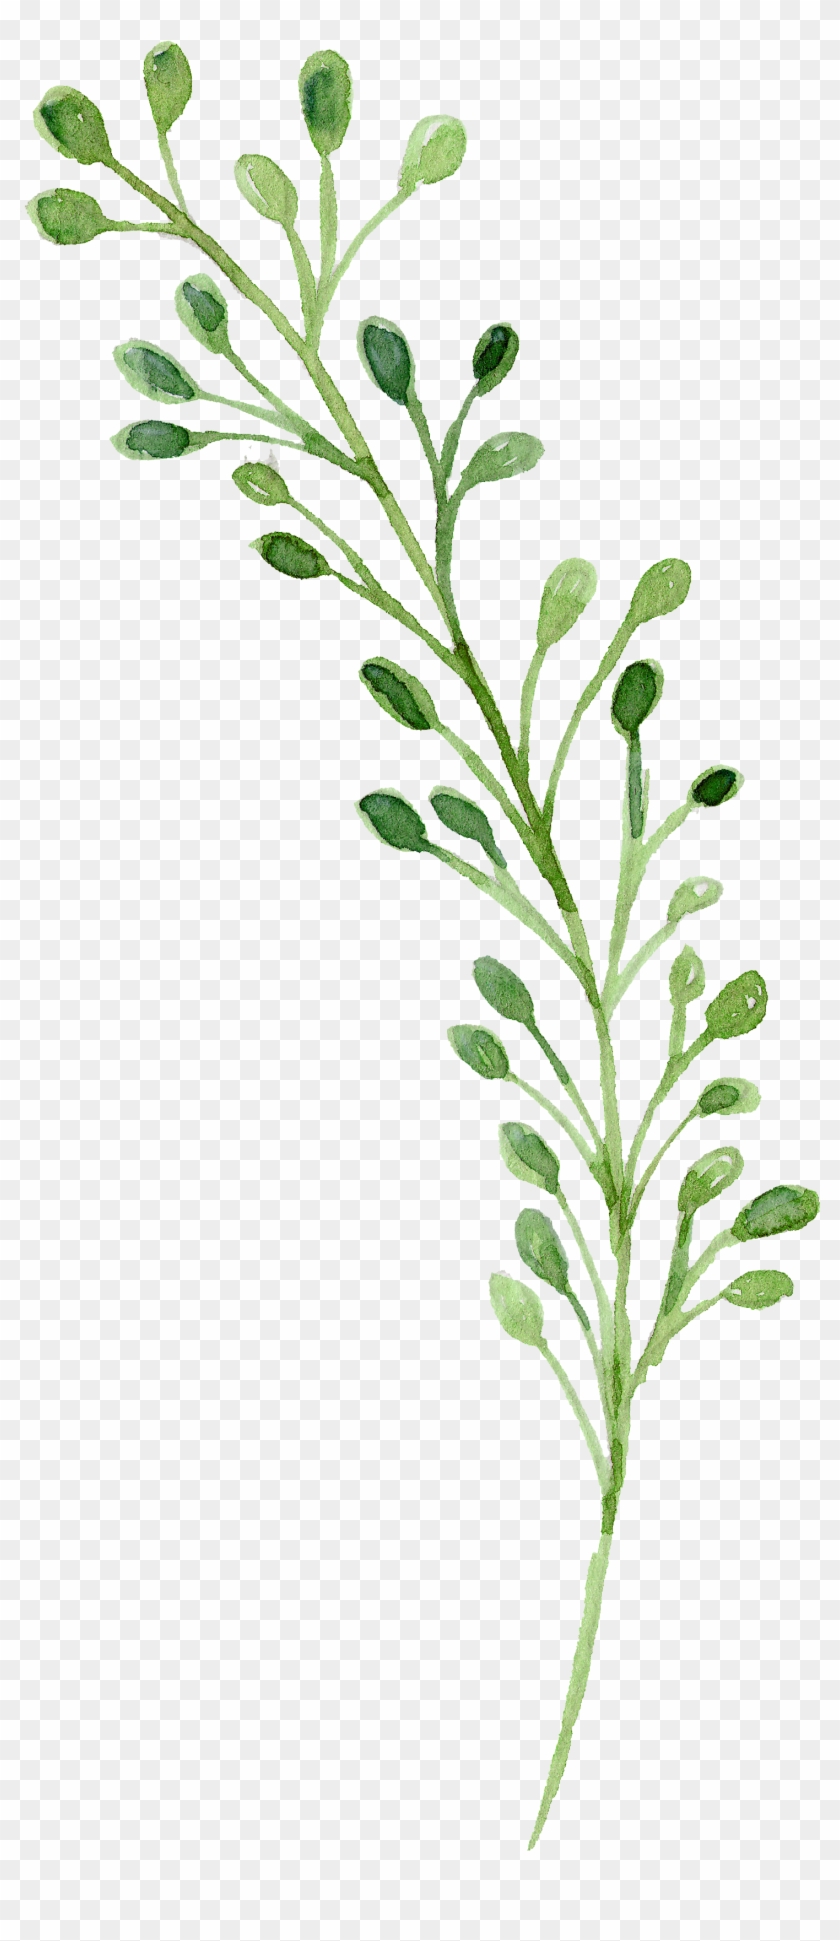 Watercolor Green Flowers Painting Download Free Image - Watercolor Green Flowers Png Clipart #2393432